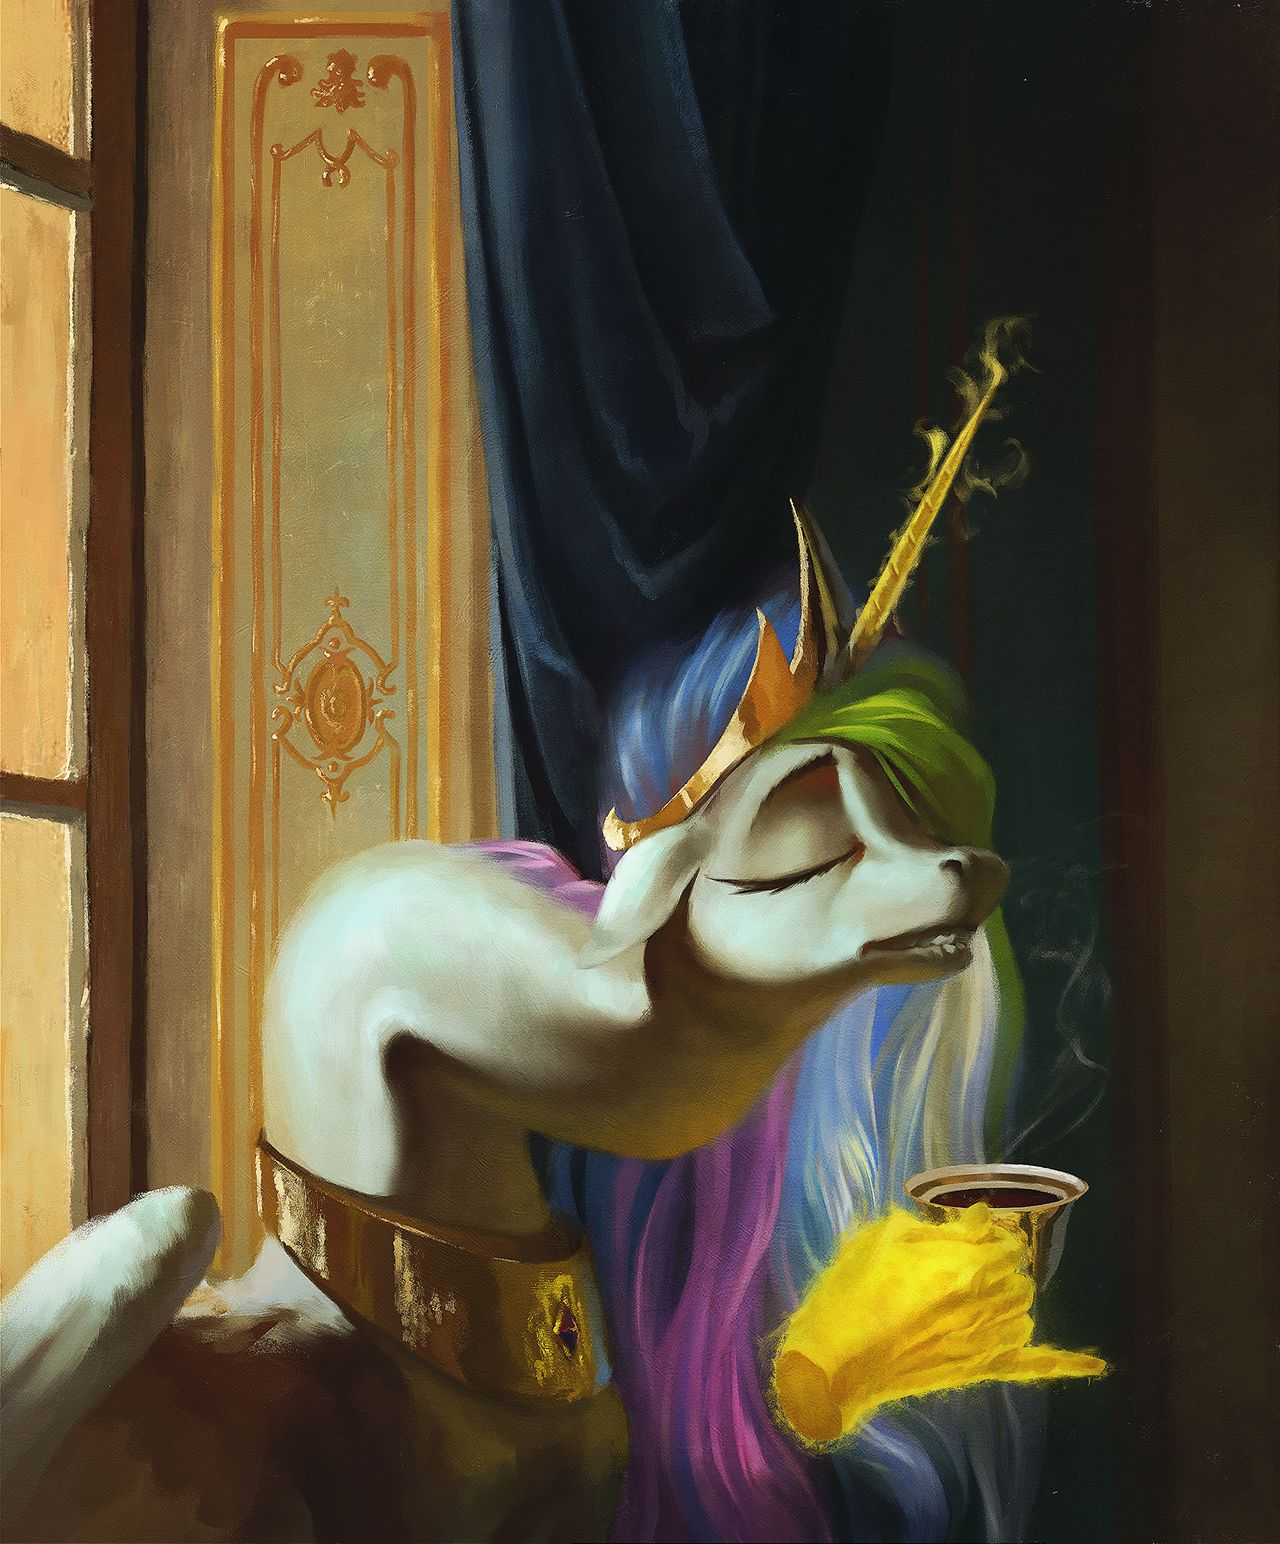 That's some good tea right there - My little pony, Princess celestia, Bra1neater